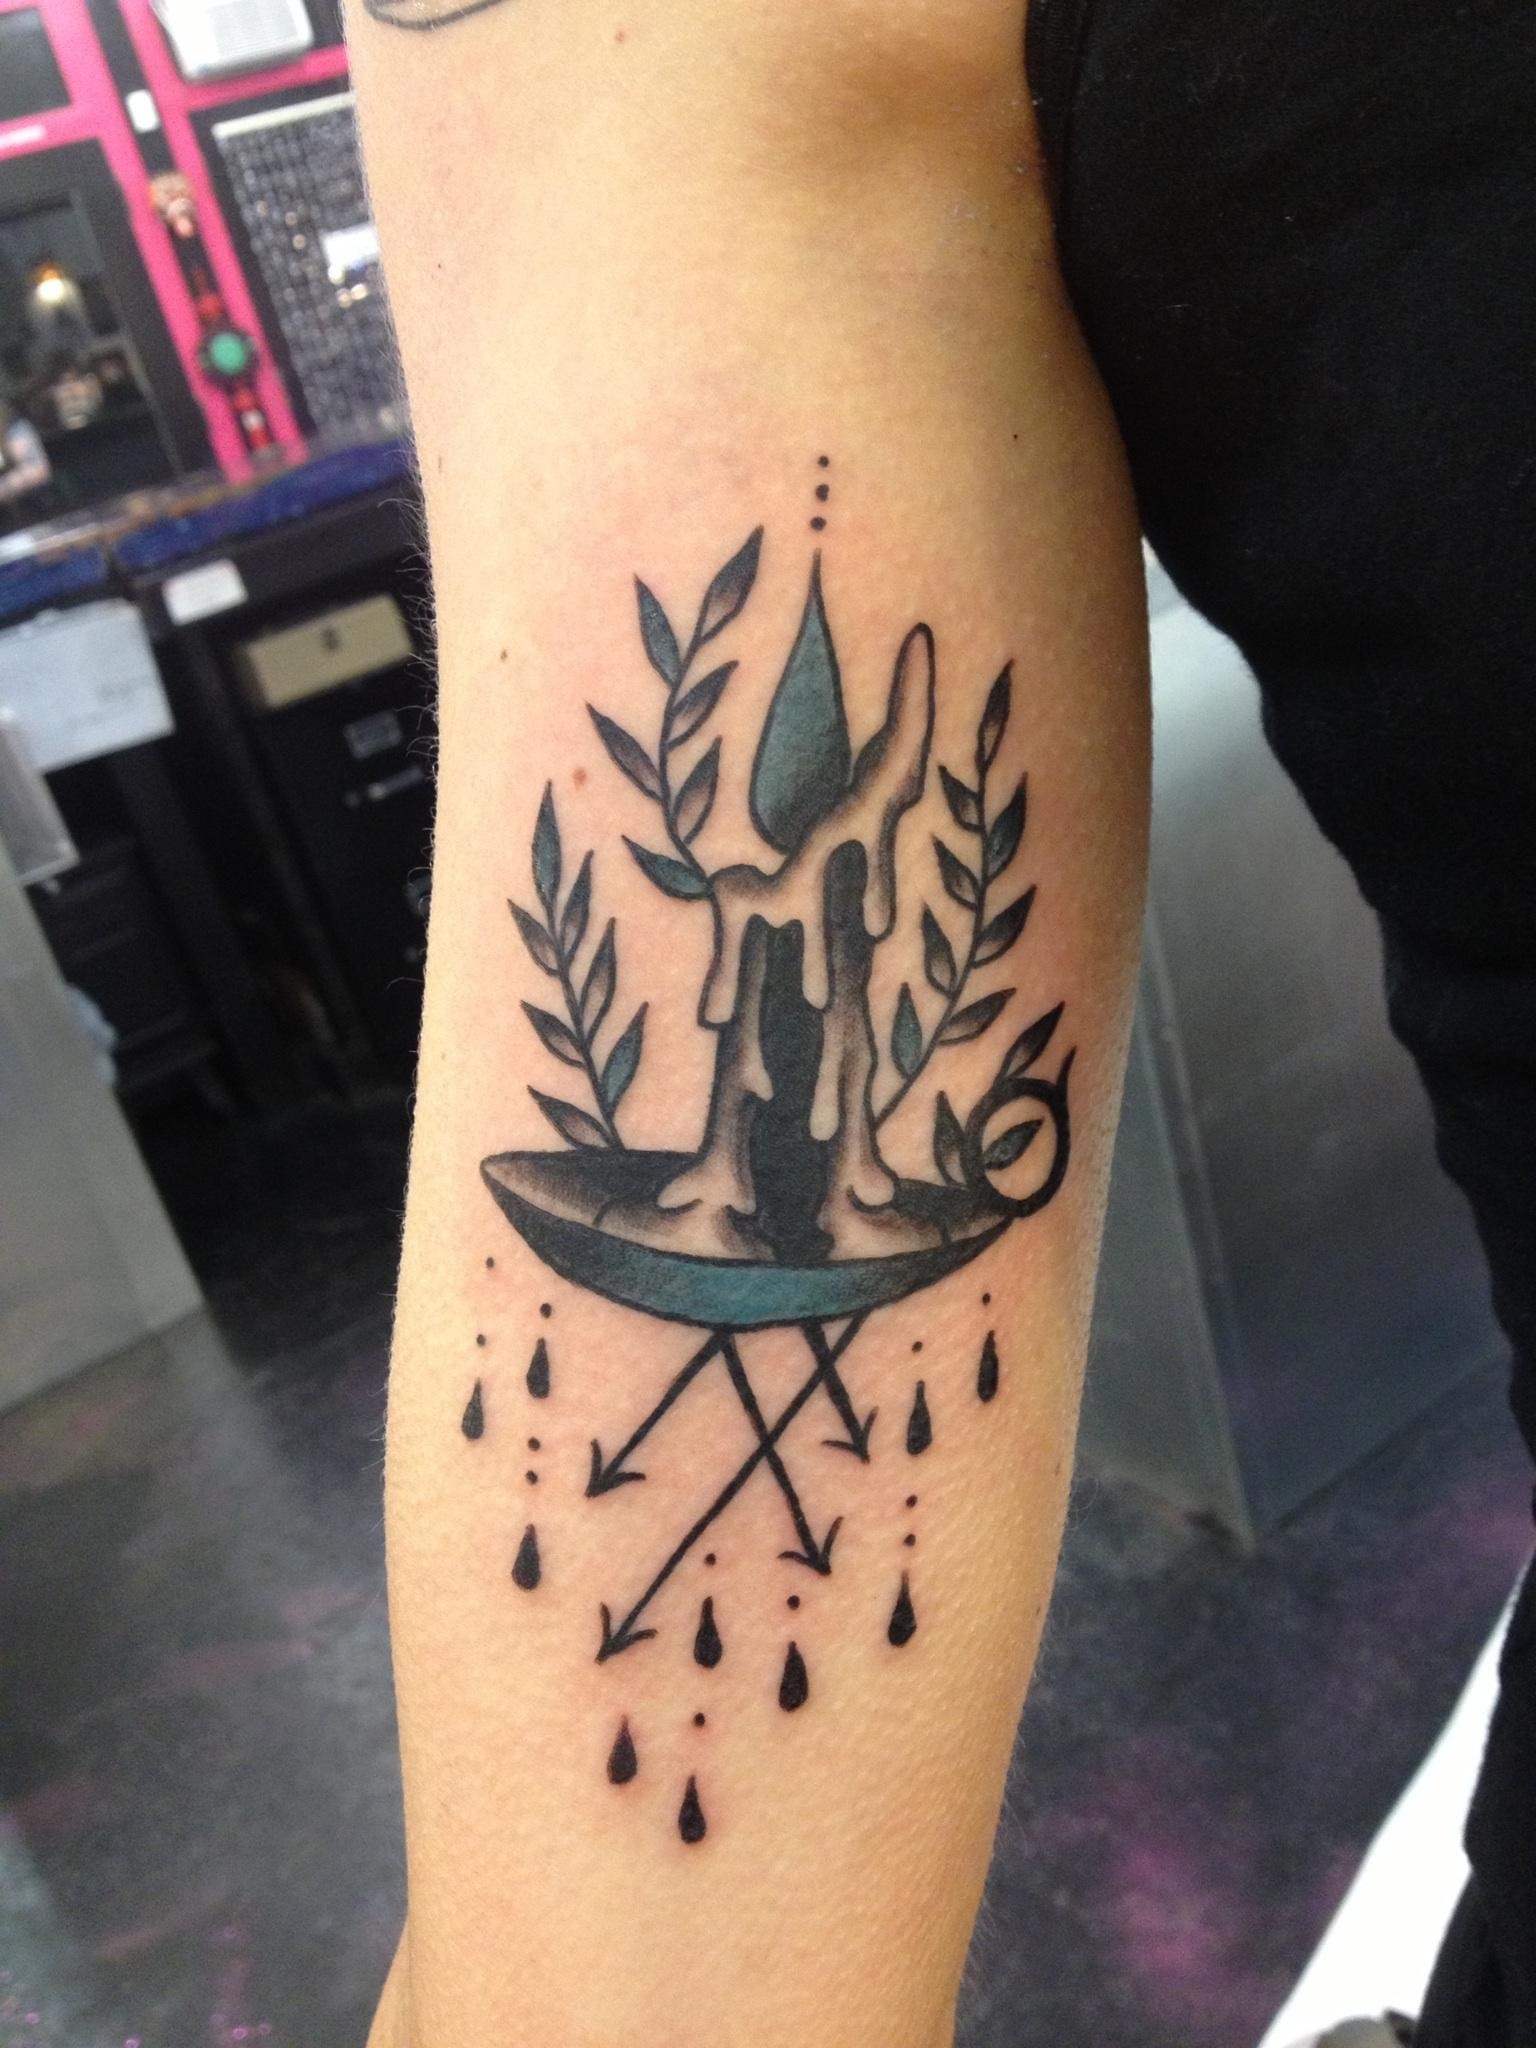 Burning Candle In Holder Tattoo On Bicep